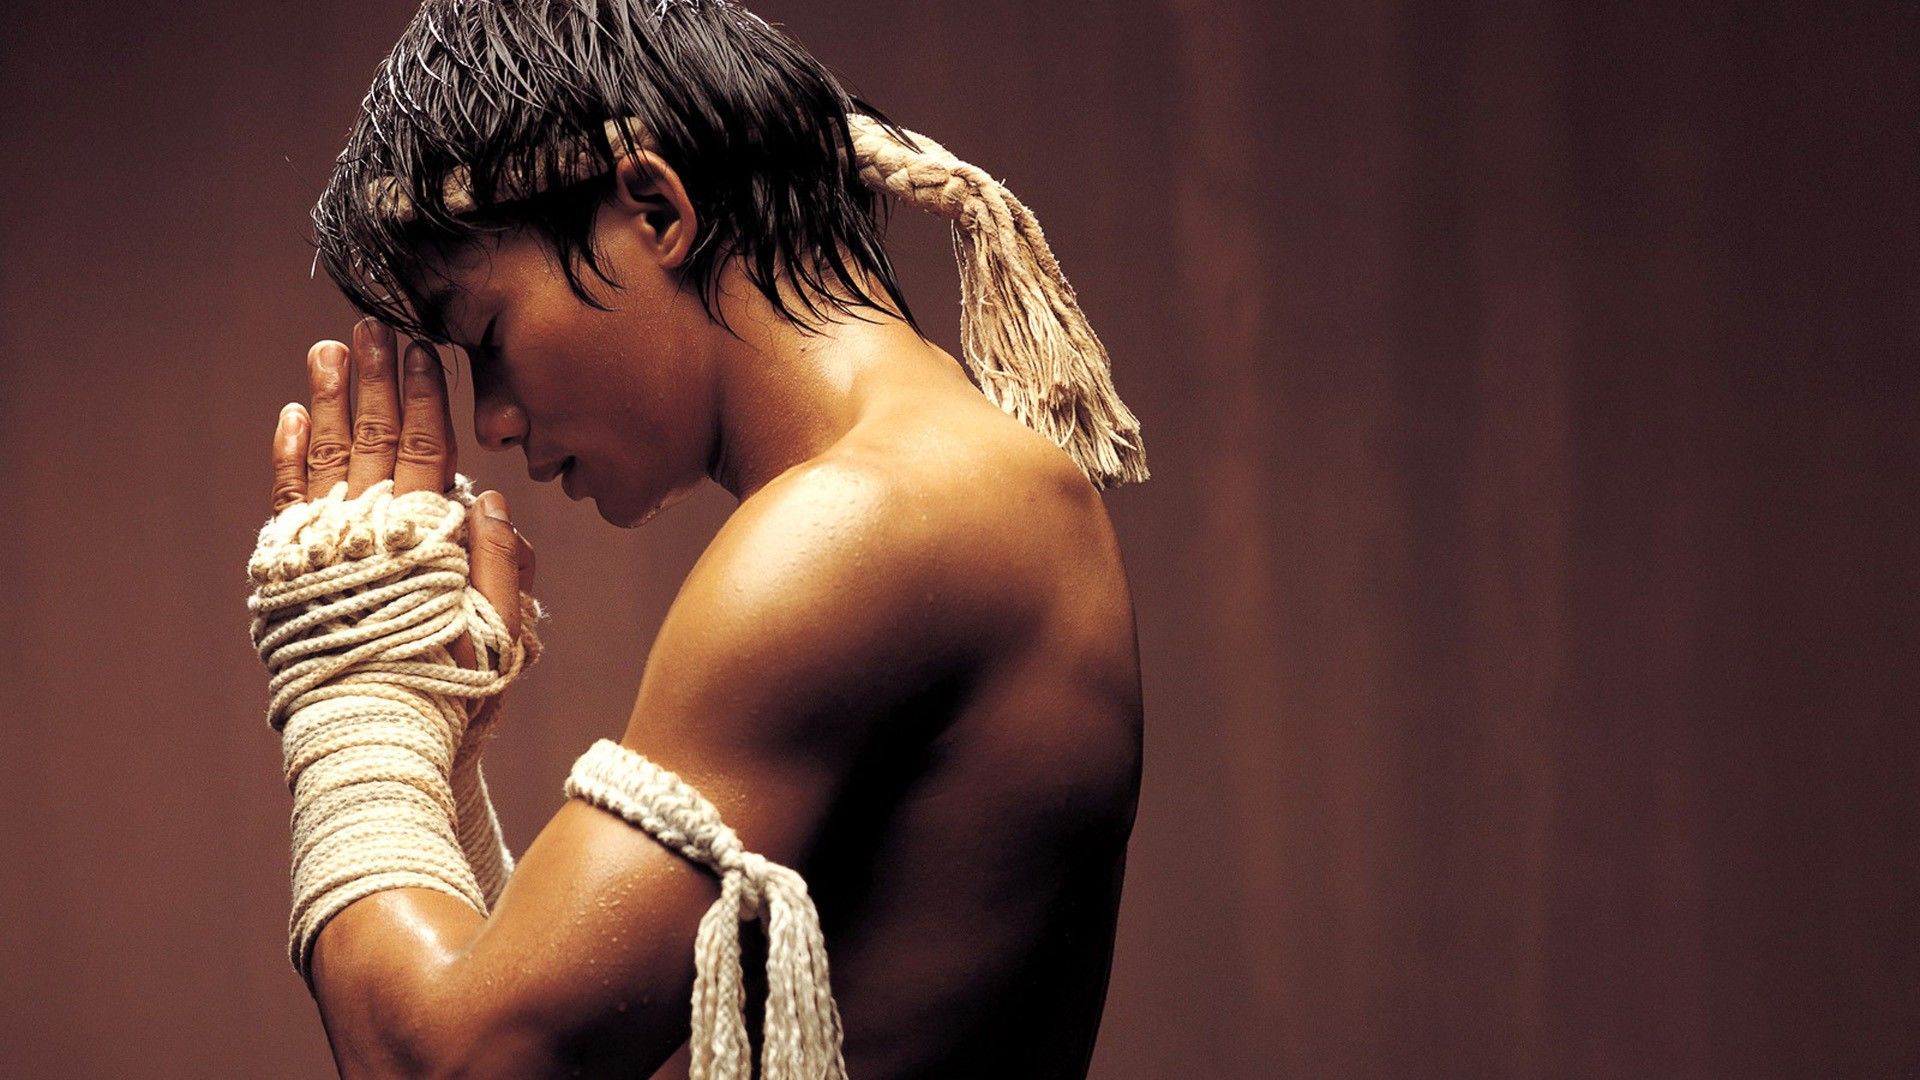 2 Tony Jaa HD Wallpapers Backgrounds - Wallpaper Abyss